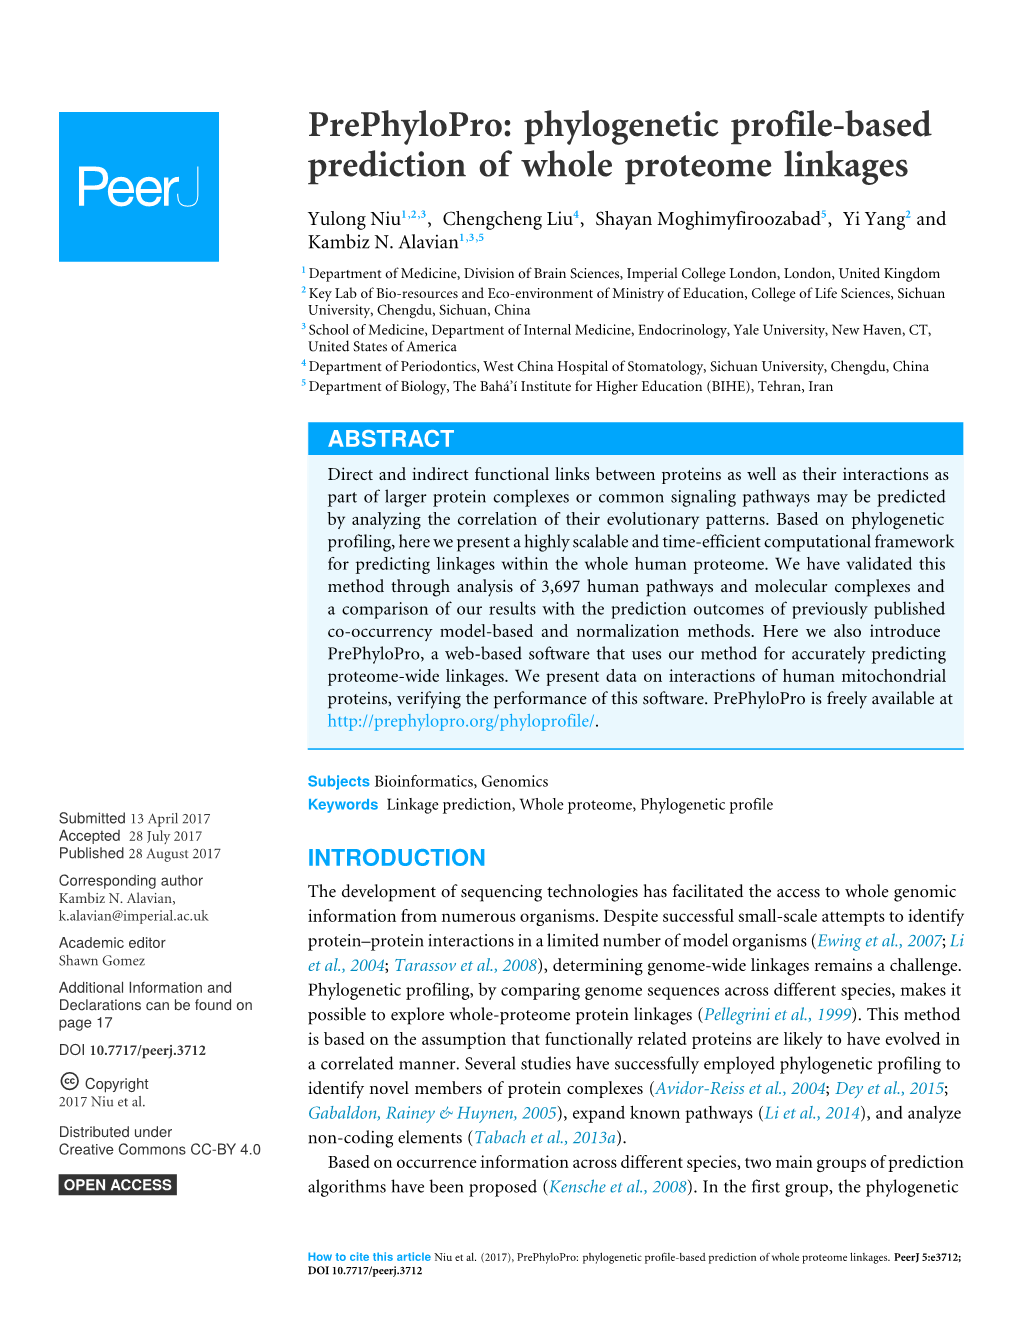 Phylogenetic Profile-Based Prediction of Whole Proteome Linkages